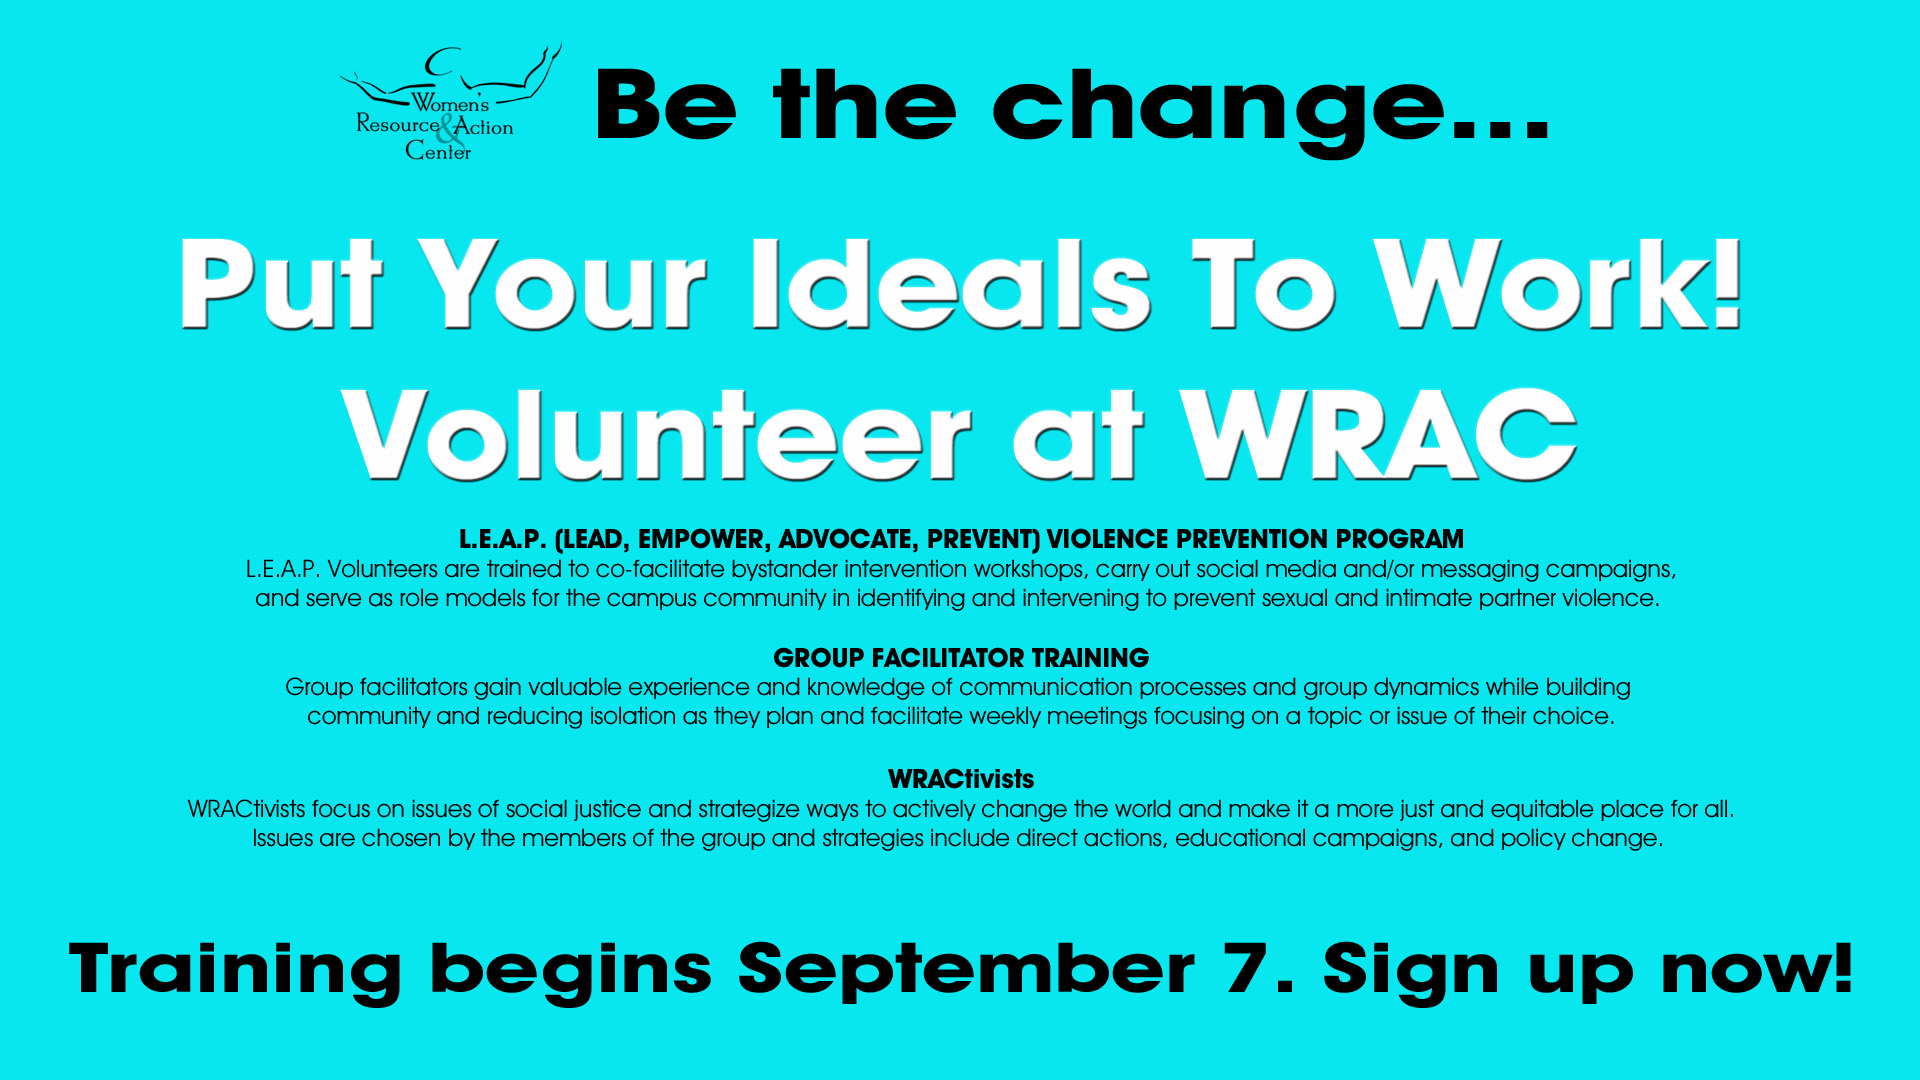 Be the Change. Put your ideals to Work. Volunteer at WRAC. Training begins September 7. Sign up now.